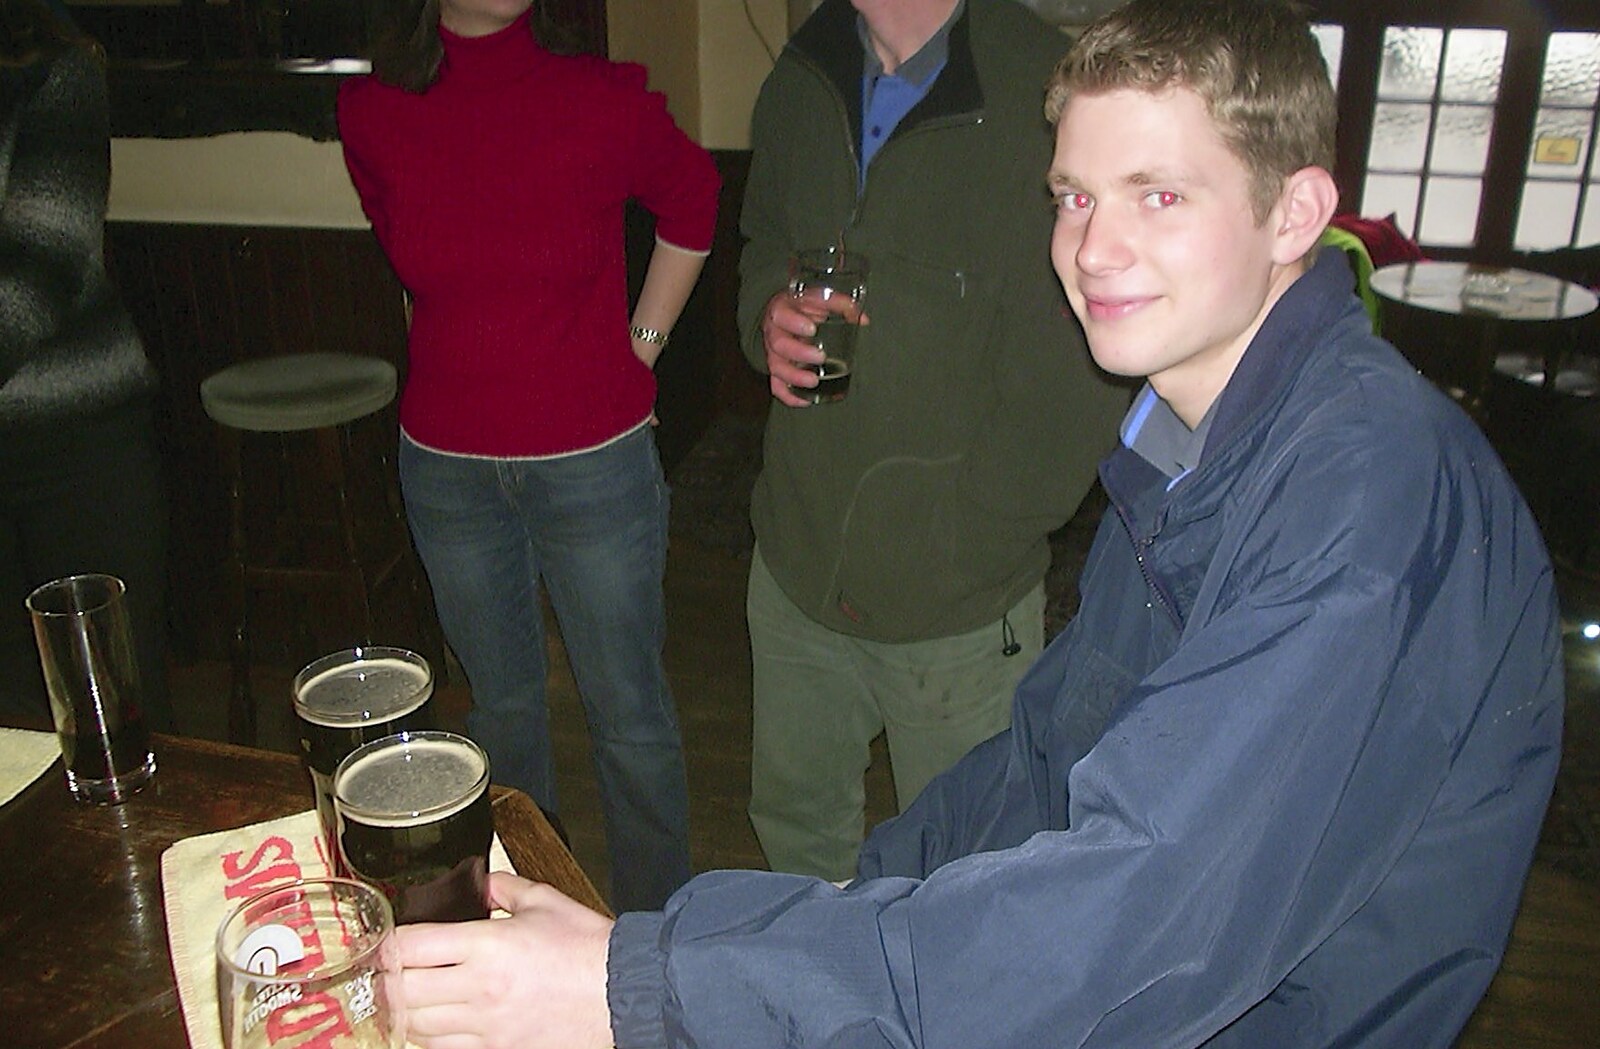 The BSCC's Evil Valentine's Day Bike Ride, Harleston, Norfolk - 14th February 2004: The Boy Phil has got the beers in